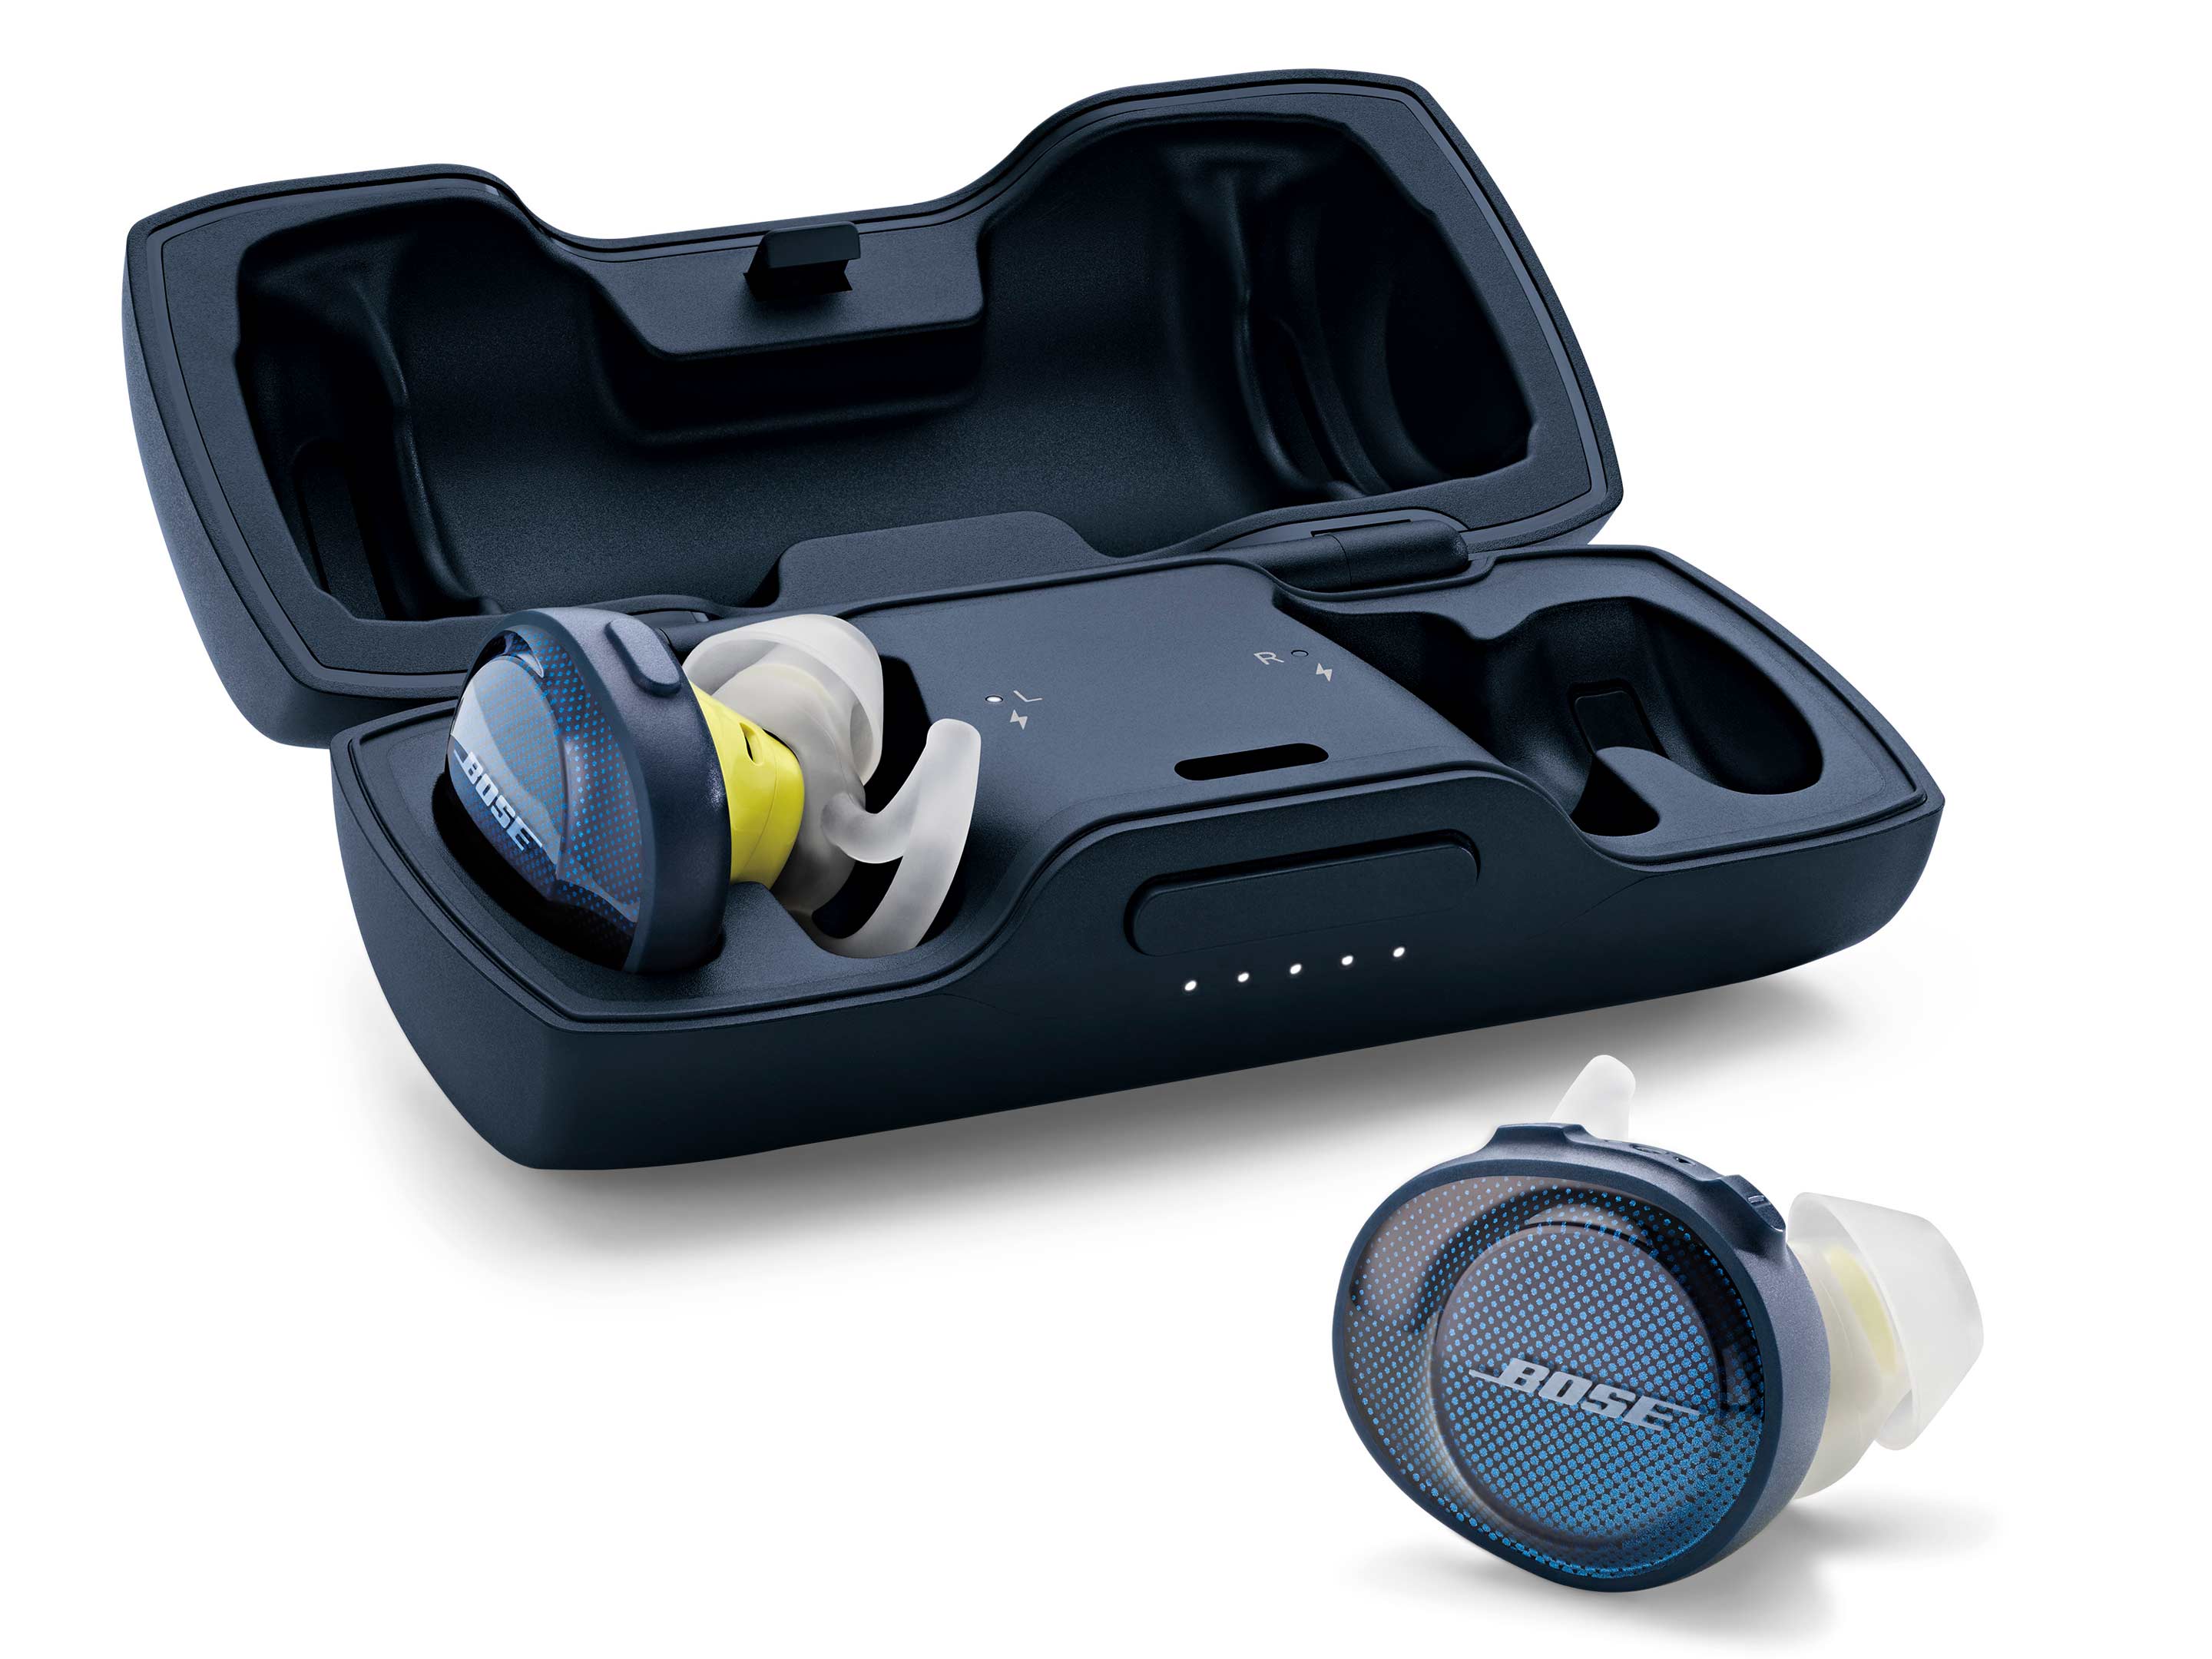 The charging case that comes with the new Bose SoundSport Free headphones